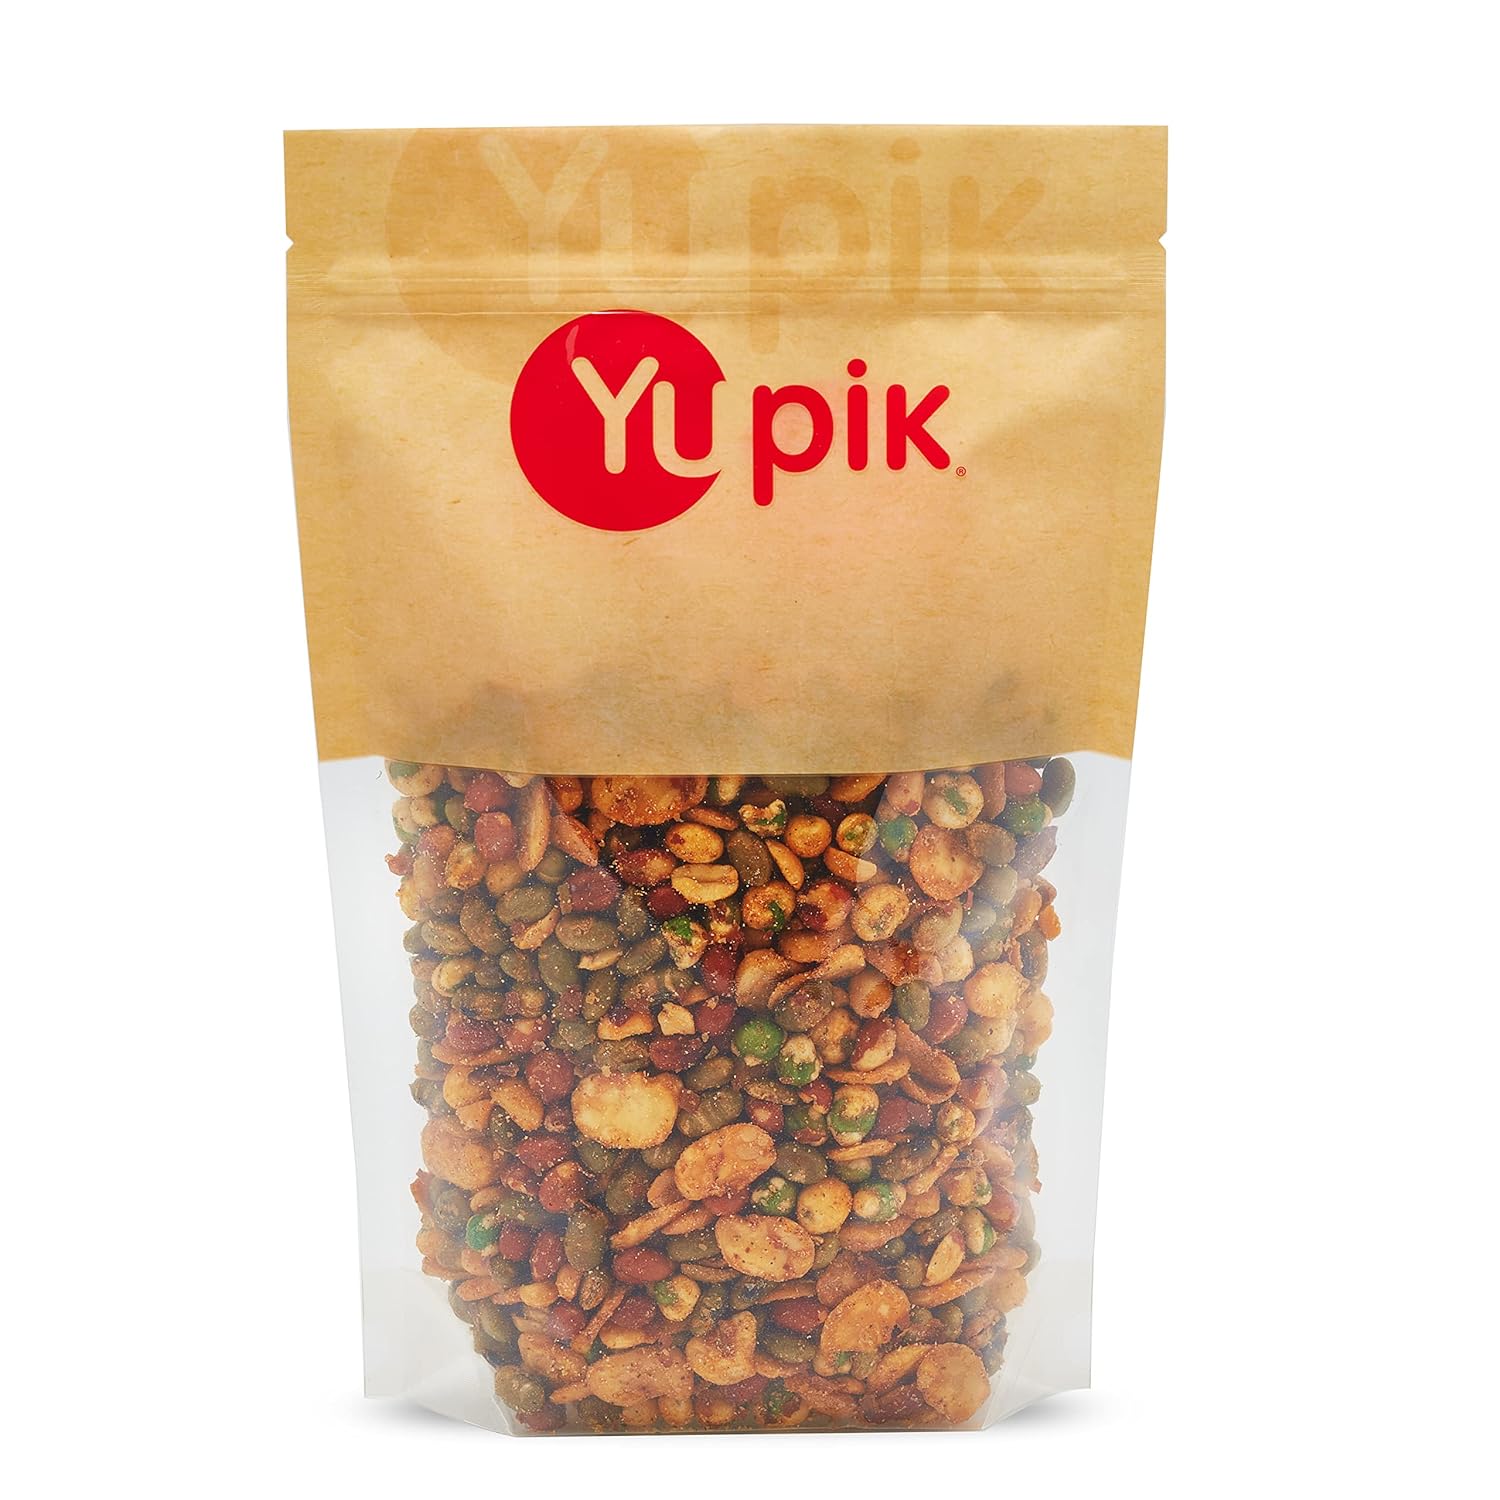 Yupik Spicy Korean BBQ Protein Snack Mix, 2.2 lbs, Roasted Peanuts, Beans & Peas Seasoned with Togarashi Spice, High In Protein, Vegan, Non GMO, No Preservatives or Artificial Flavors, Brown, Pack of 1